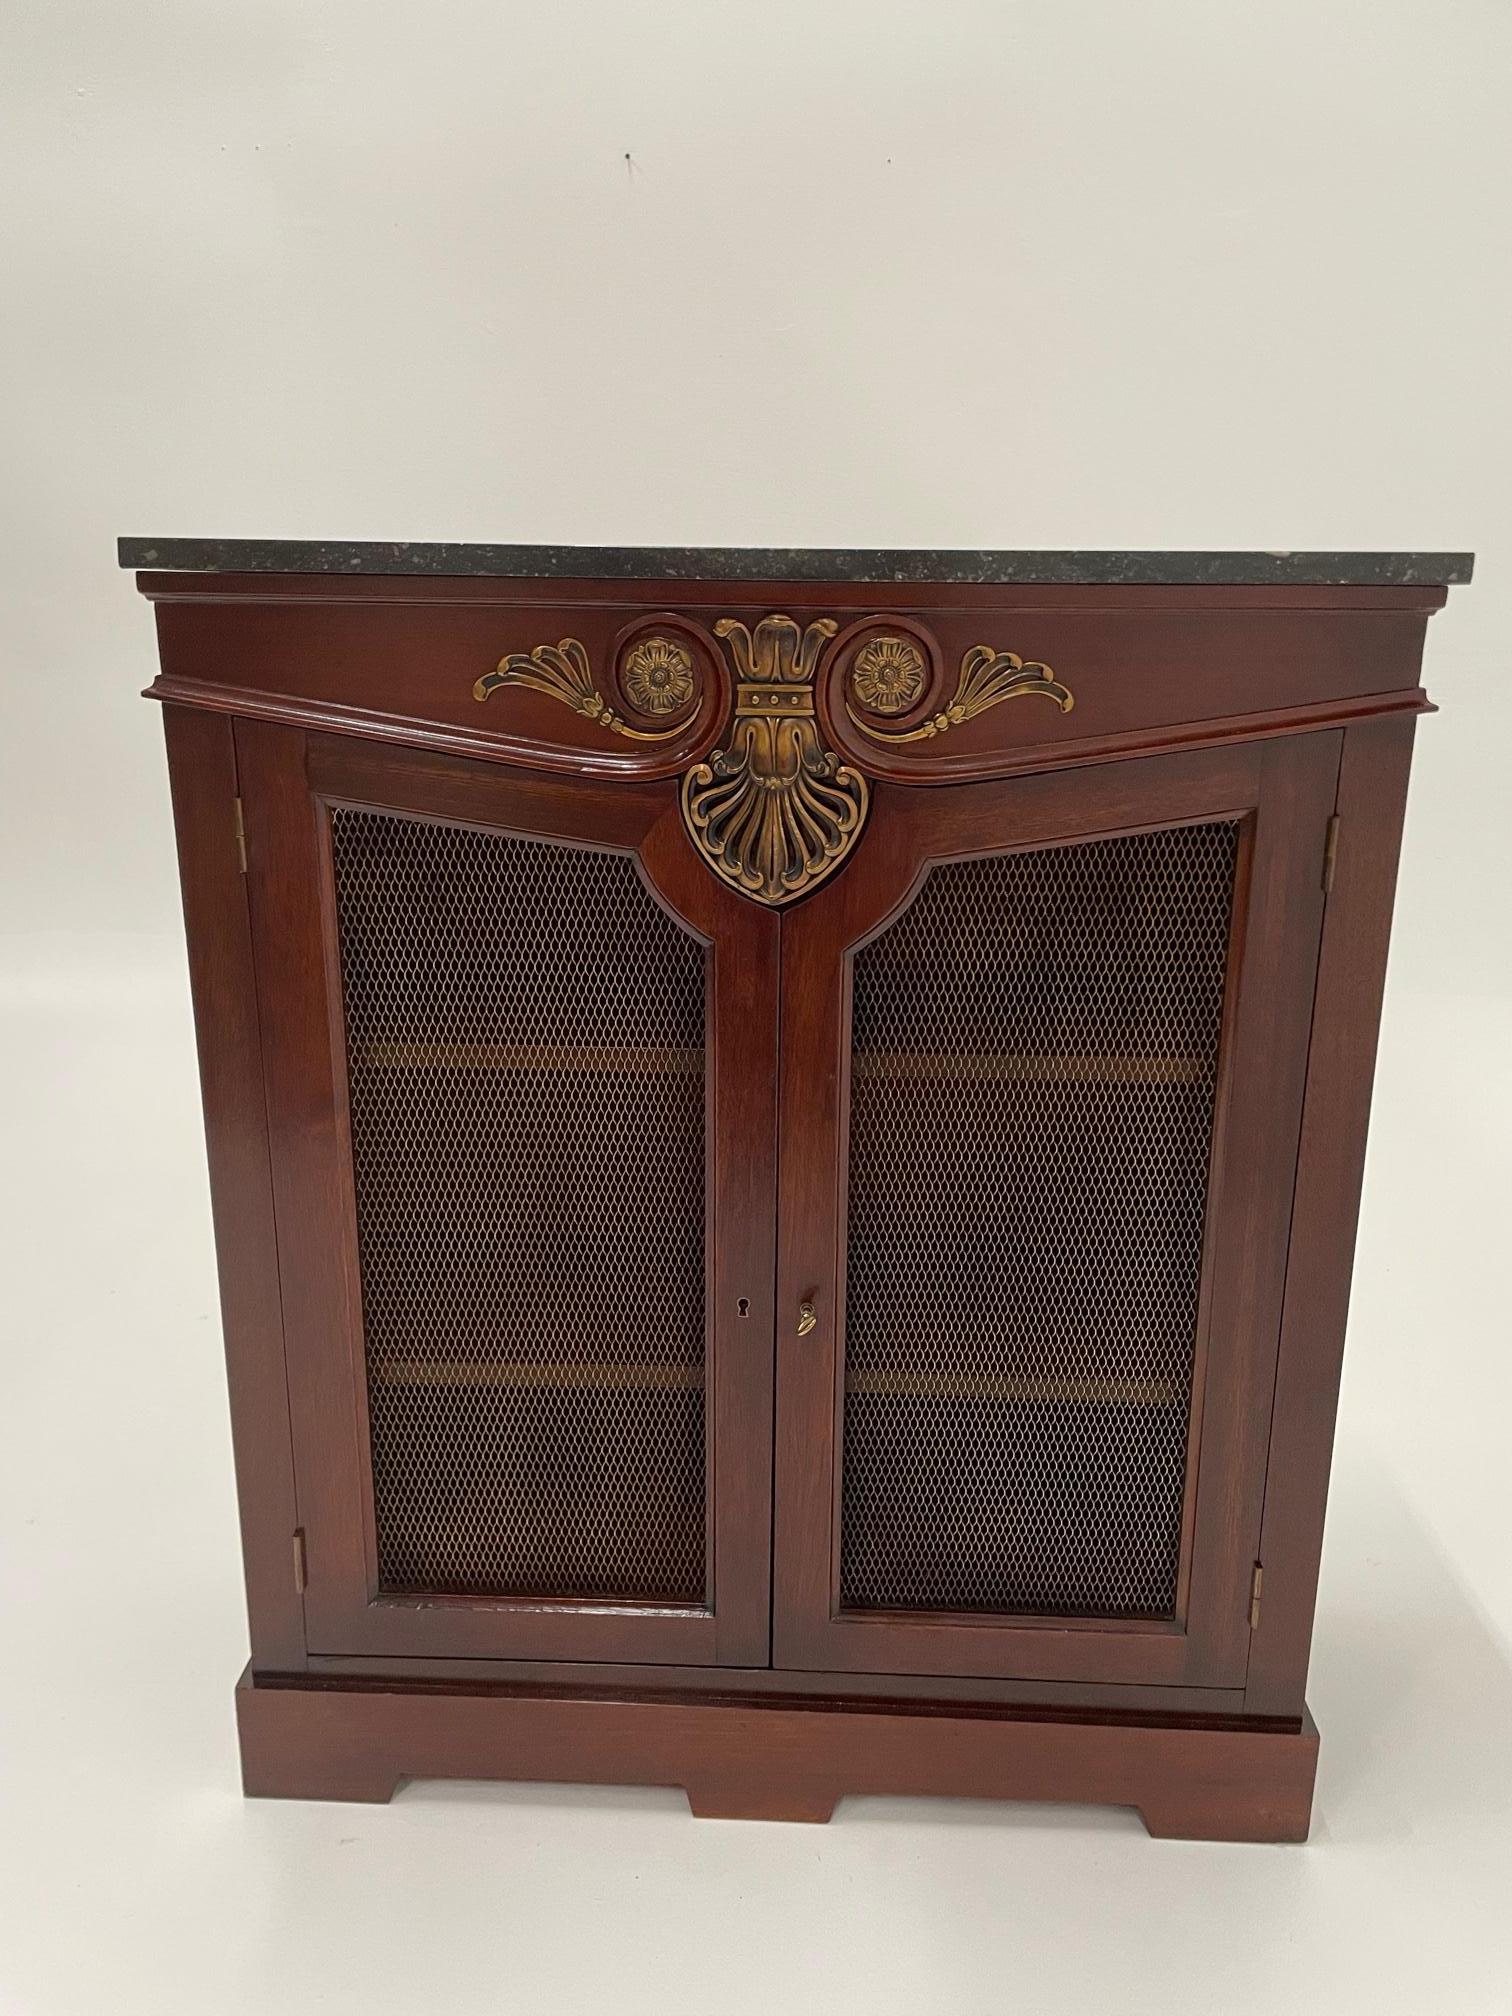 Richly crafted mahogany Regency style bookcase having raised fancy cartouche at the top, brass mesh doors and marble top. There are two adjustable shelves inside and key included.